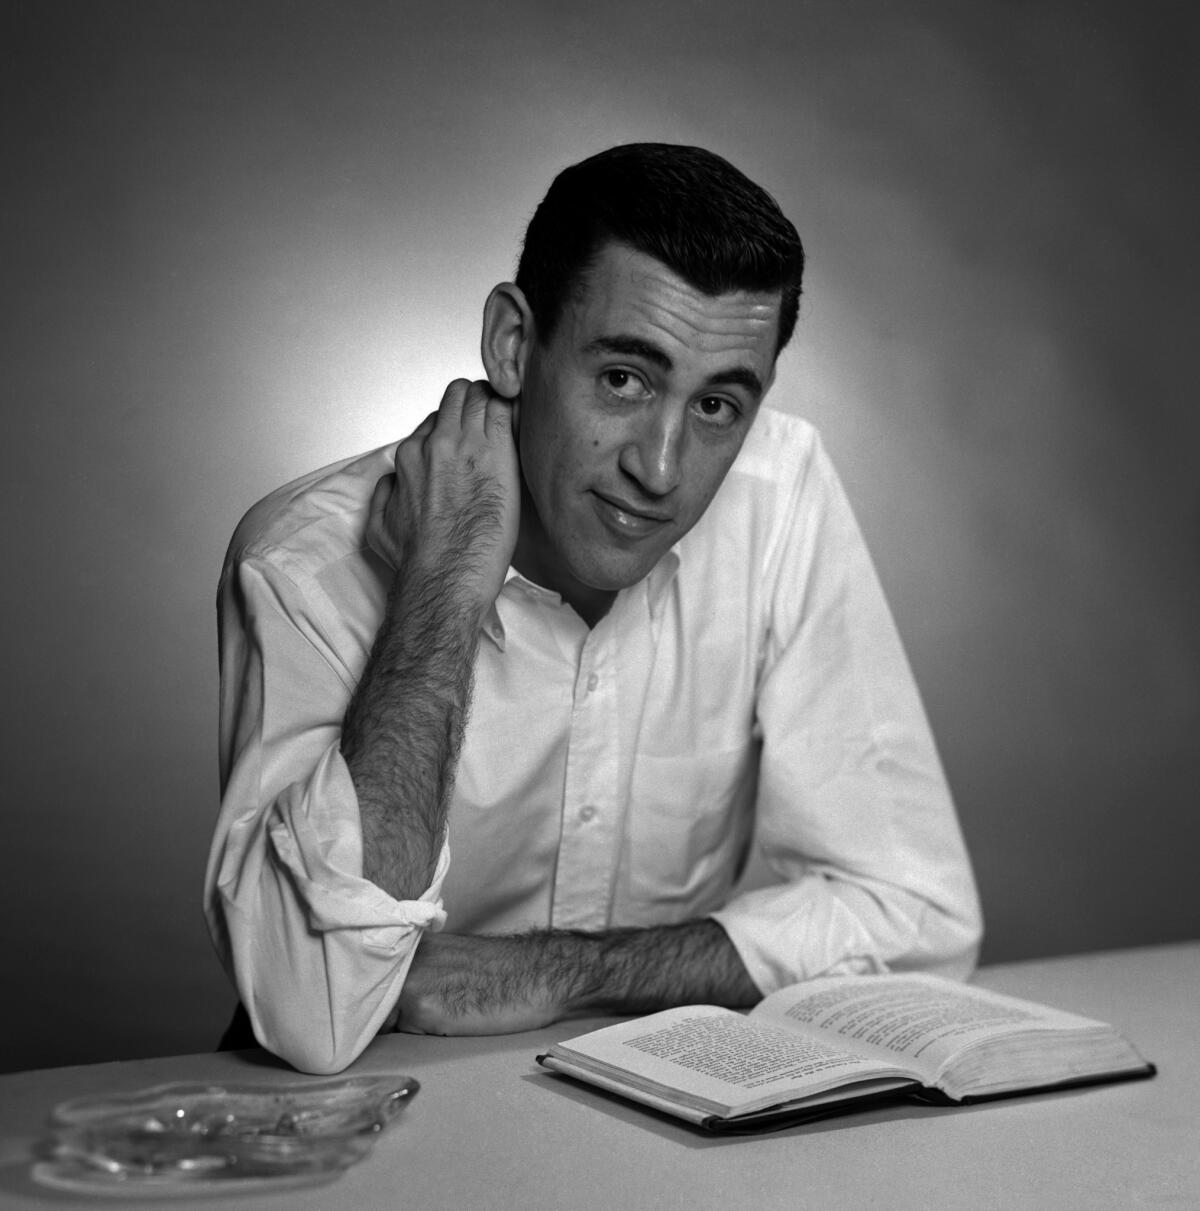 Author J.D. Salinger poses for a portrait as he reads from his novel "The Catcher in the Rye" in Brooklyn in 1952. Salinger died in 2010, but this year, three of his unpublished stories were surreptitiously published online.